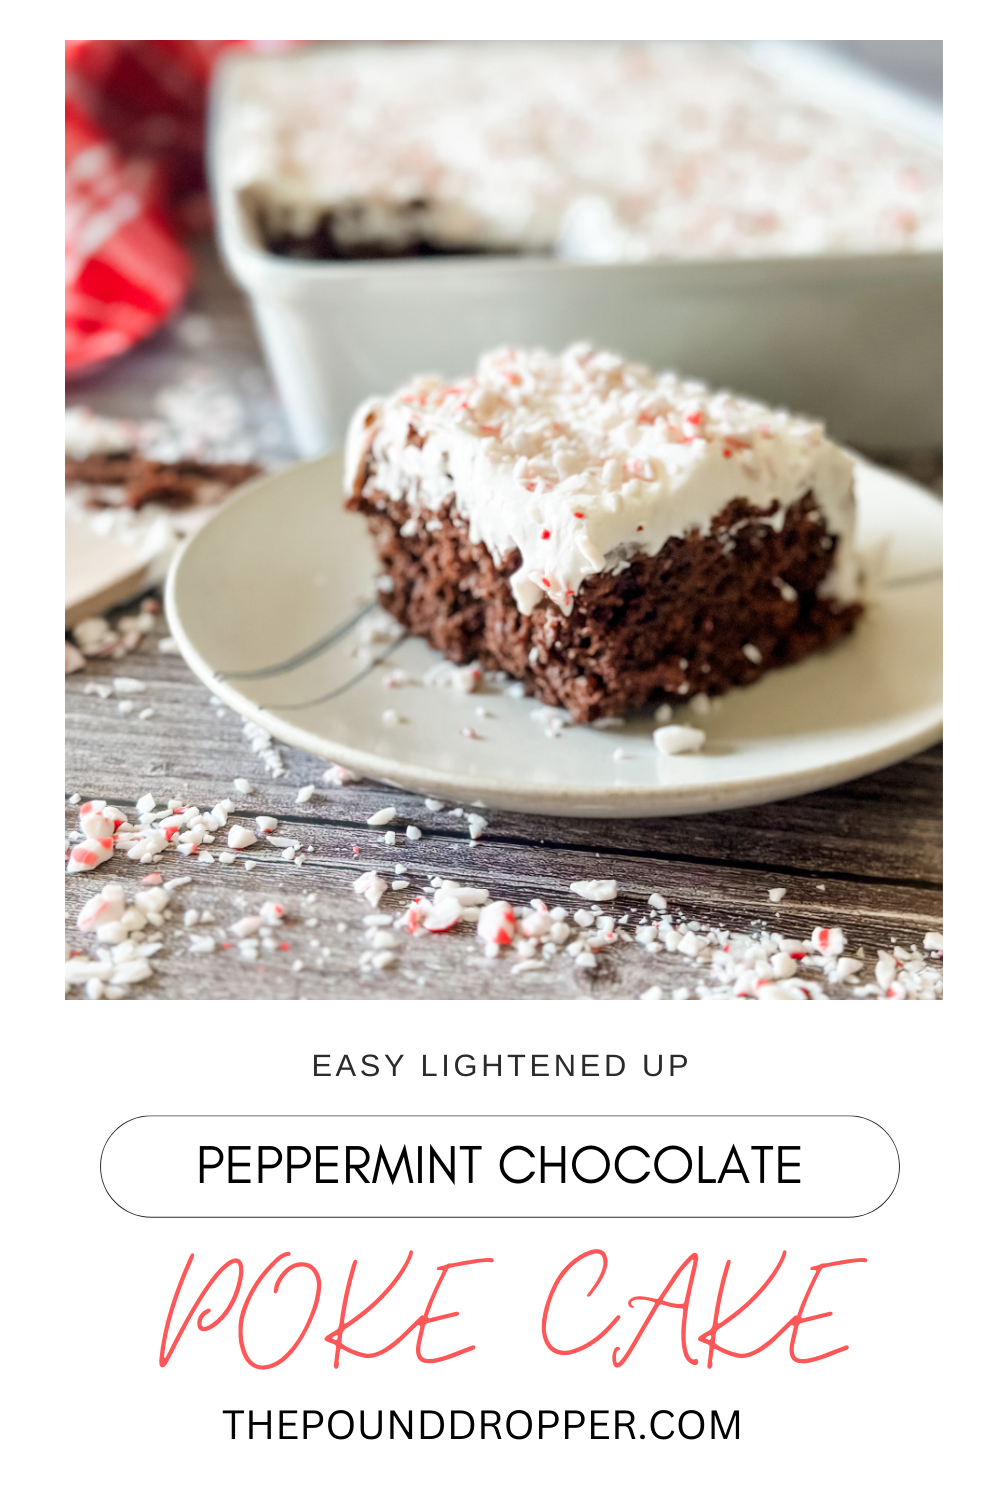 This Lightened Up Chocolate Peppermint Poke Cake is a delicious chocolate cake that is infused with a sugar free peppermint chocolate pudding and topped with fat free cool whip and crushed candy canes. This chocolate peppermint poke cake has all the flavors of the holiday season! via @pounddropper